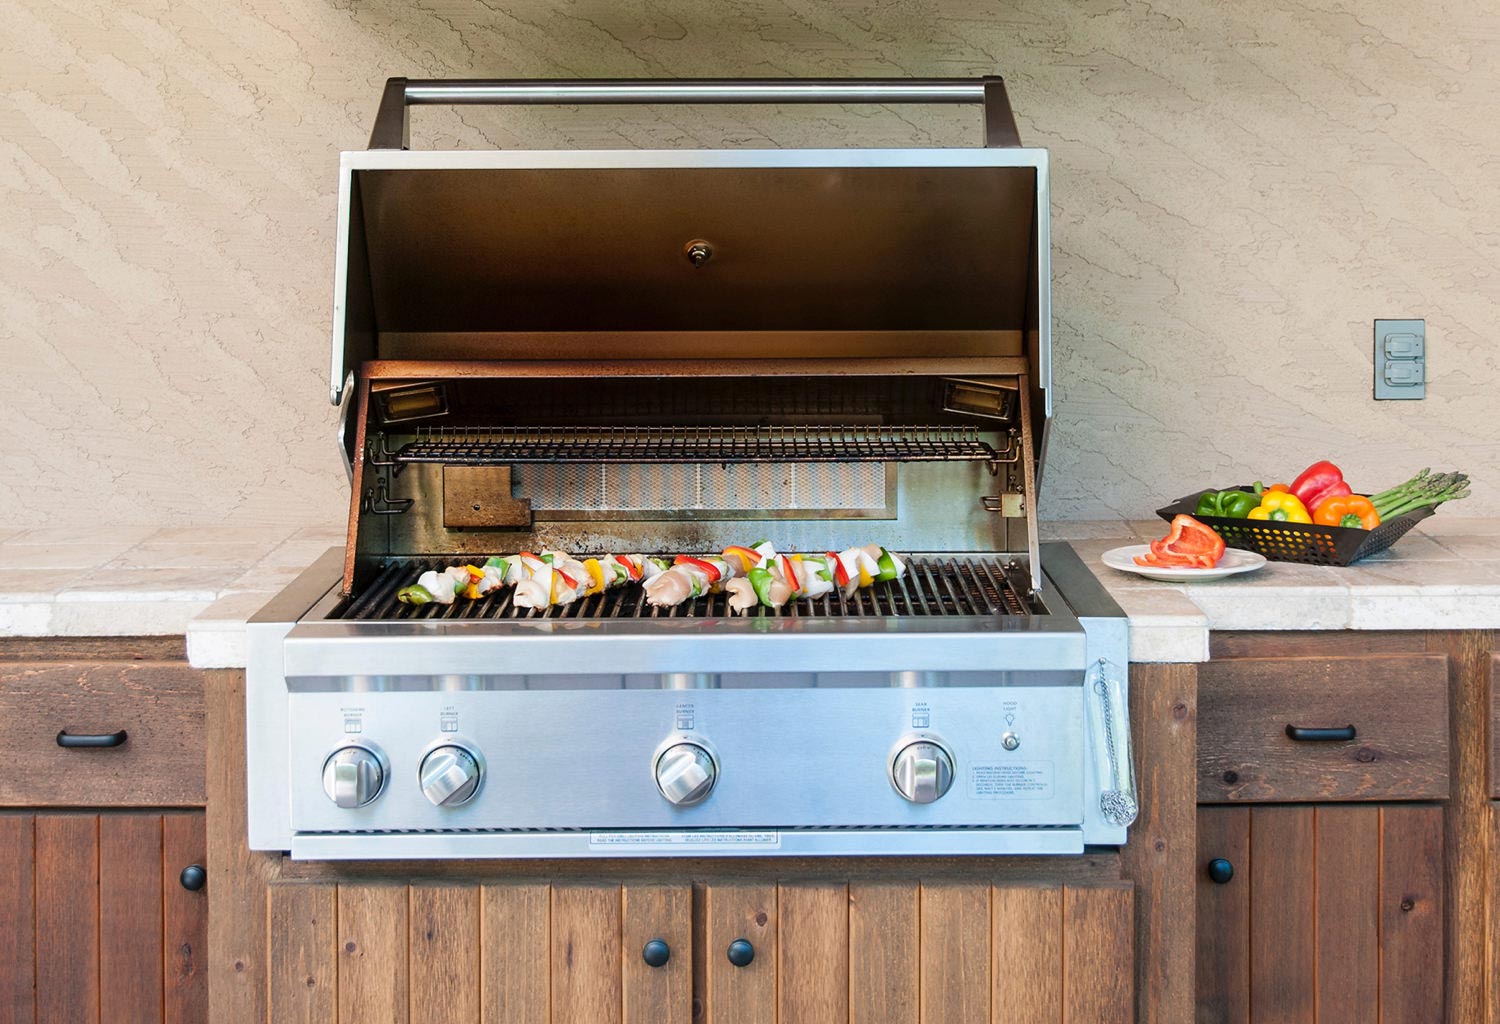 Grill with kabobs and wood cabinetry